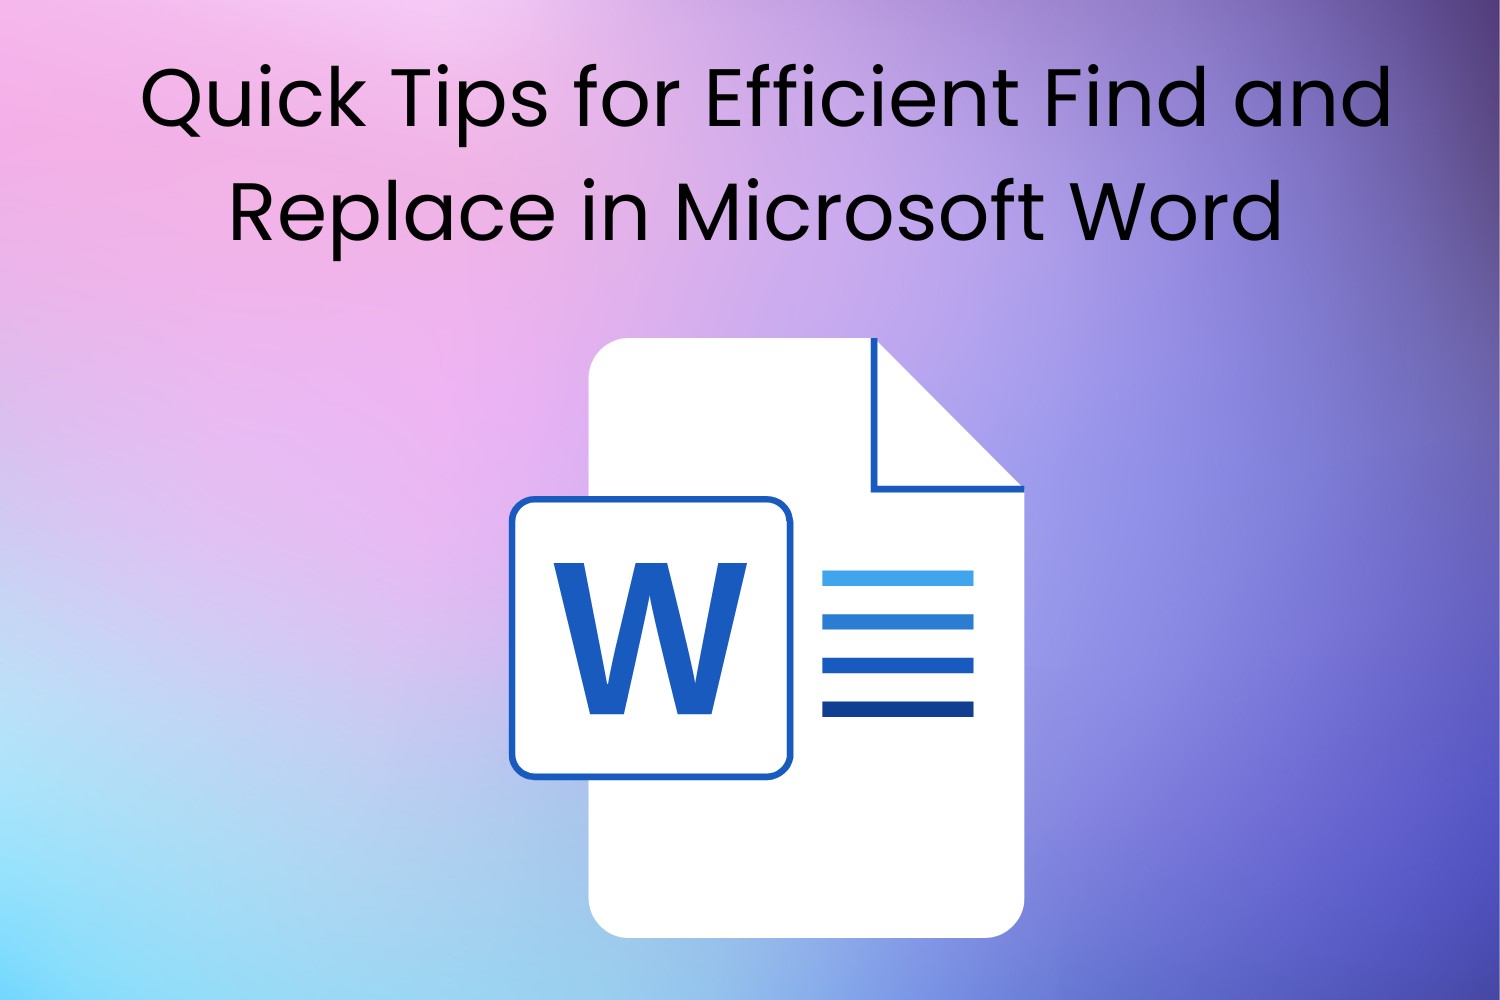 Quick Tips for Efficient Find and Replace in Microsoft Word